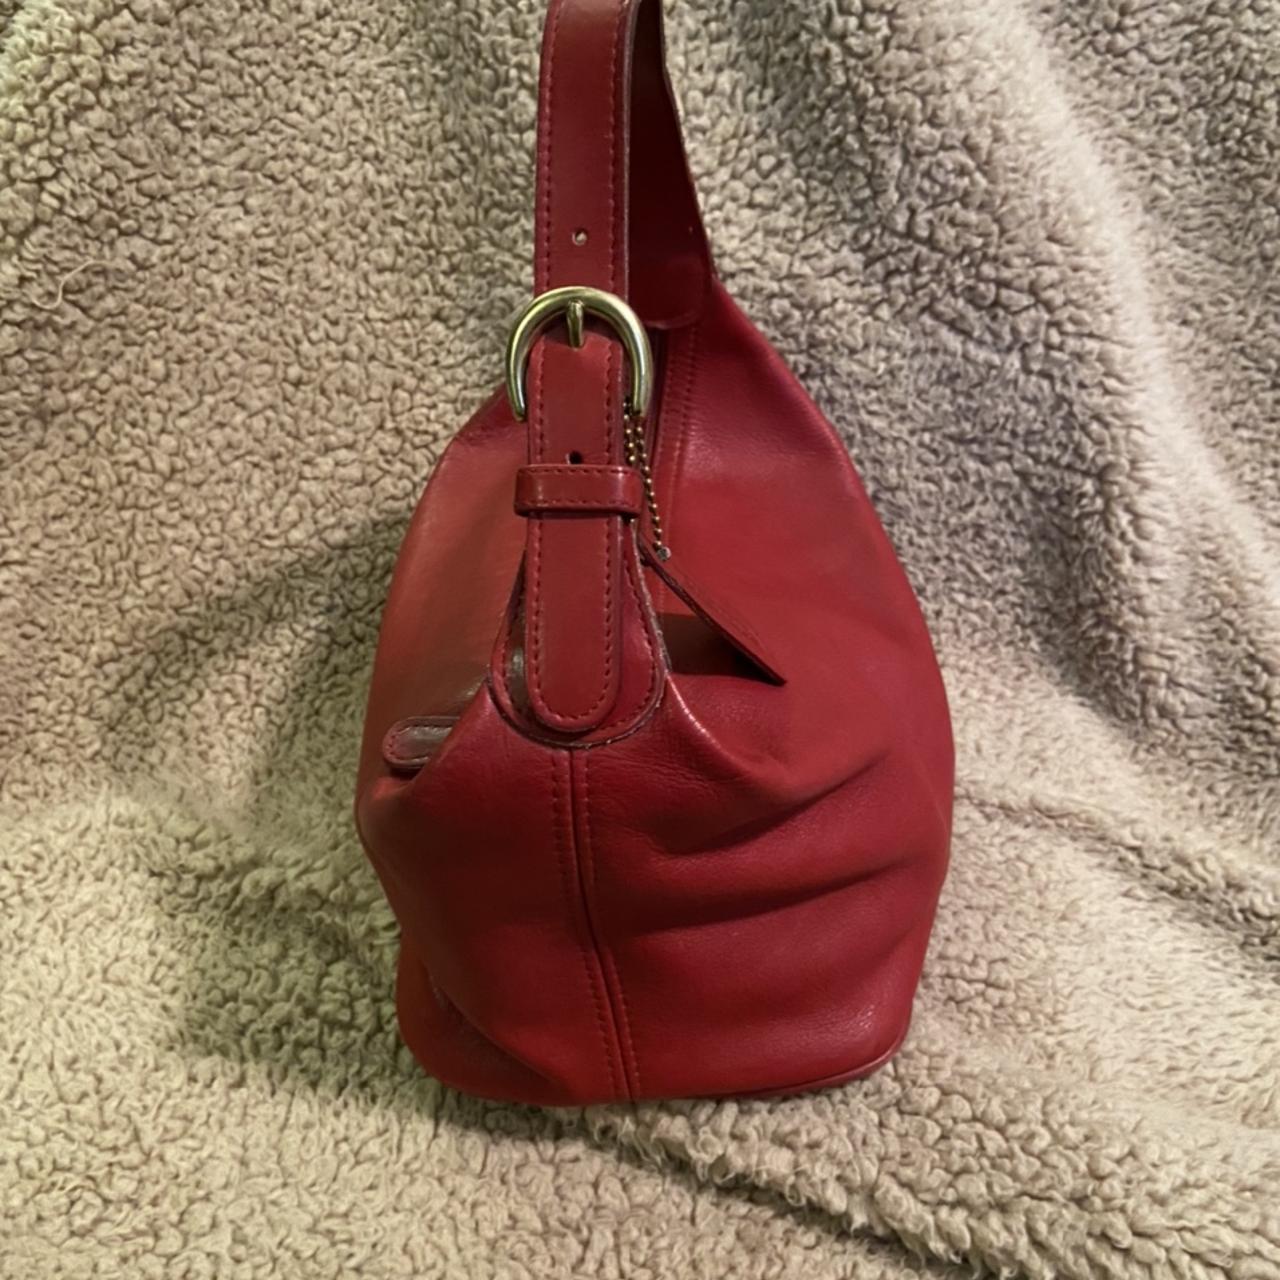 Sassy small vintage coach purse. In great shape - Depop